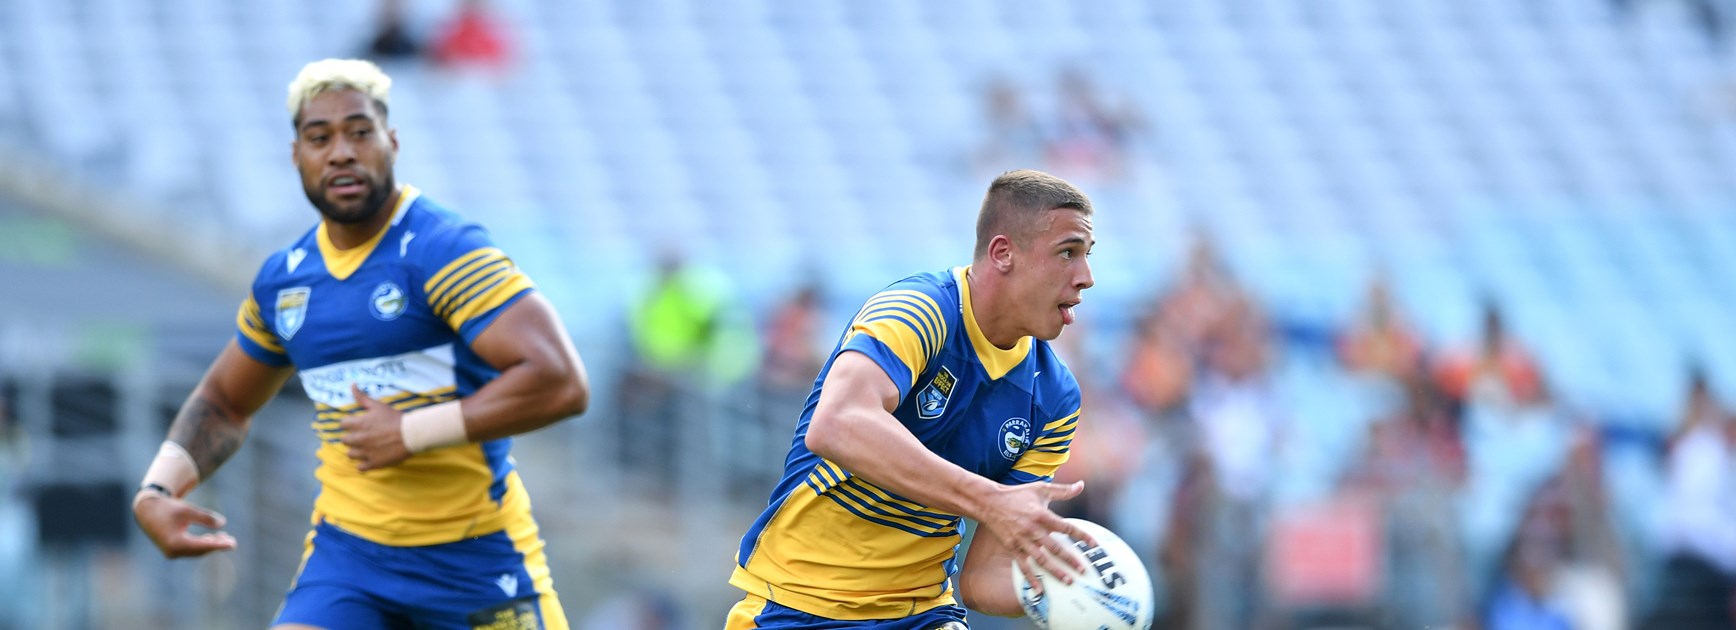 Eels dominate Dragons in Knock-On Effect NSW Cup